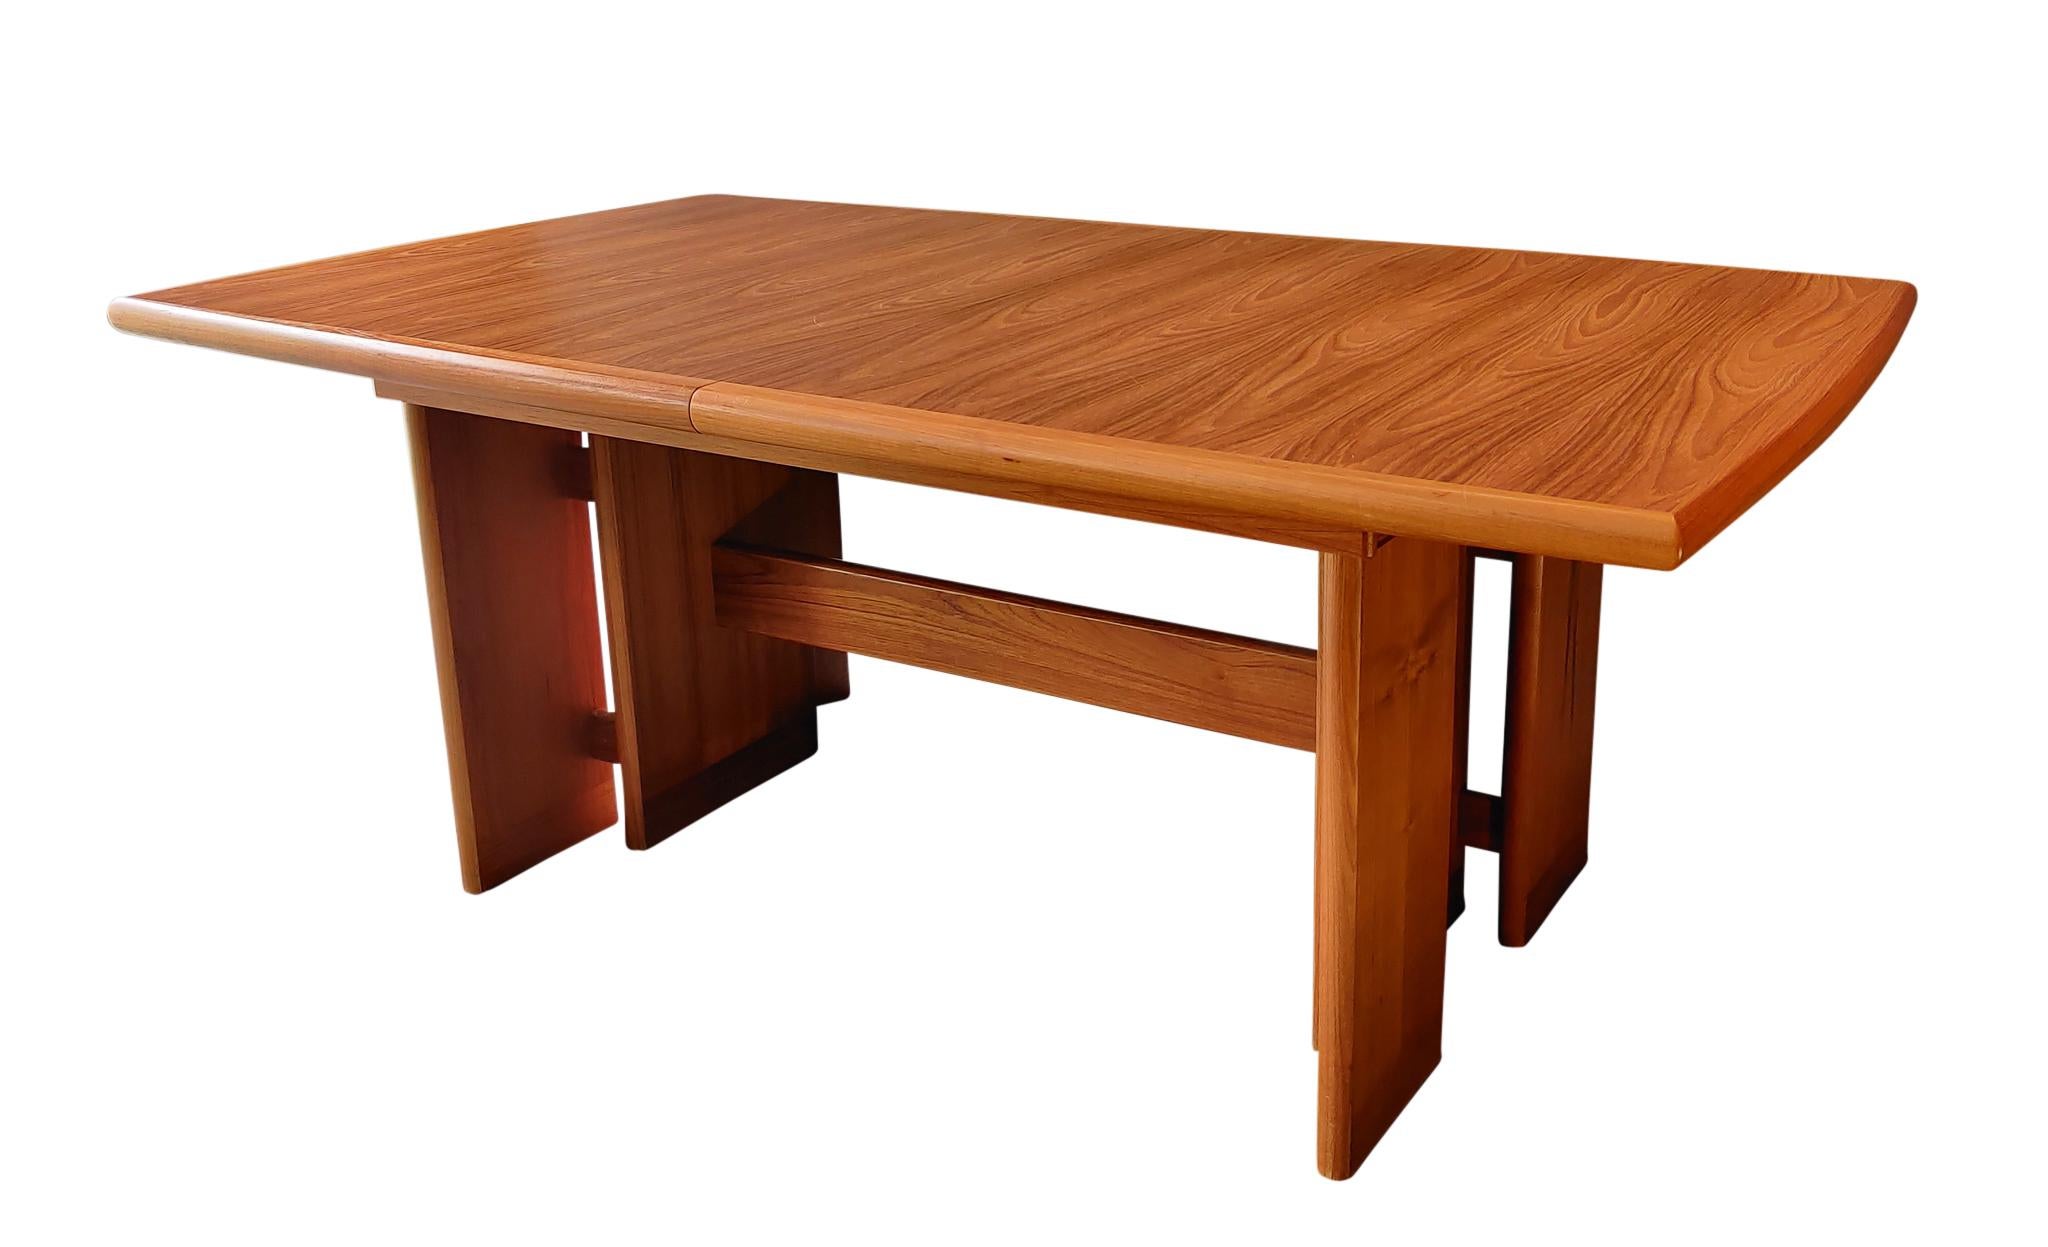 A fantastic large Danish style teak dining table by Nordic Furniture, Canadian made, from the late 1970s or early 1980s. A boat shaped table-top, with fine teak grain that's book-matched, on strong pairs of slab like and very architectural legs - so